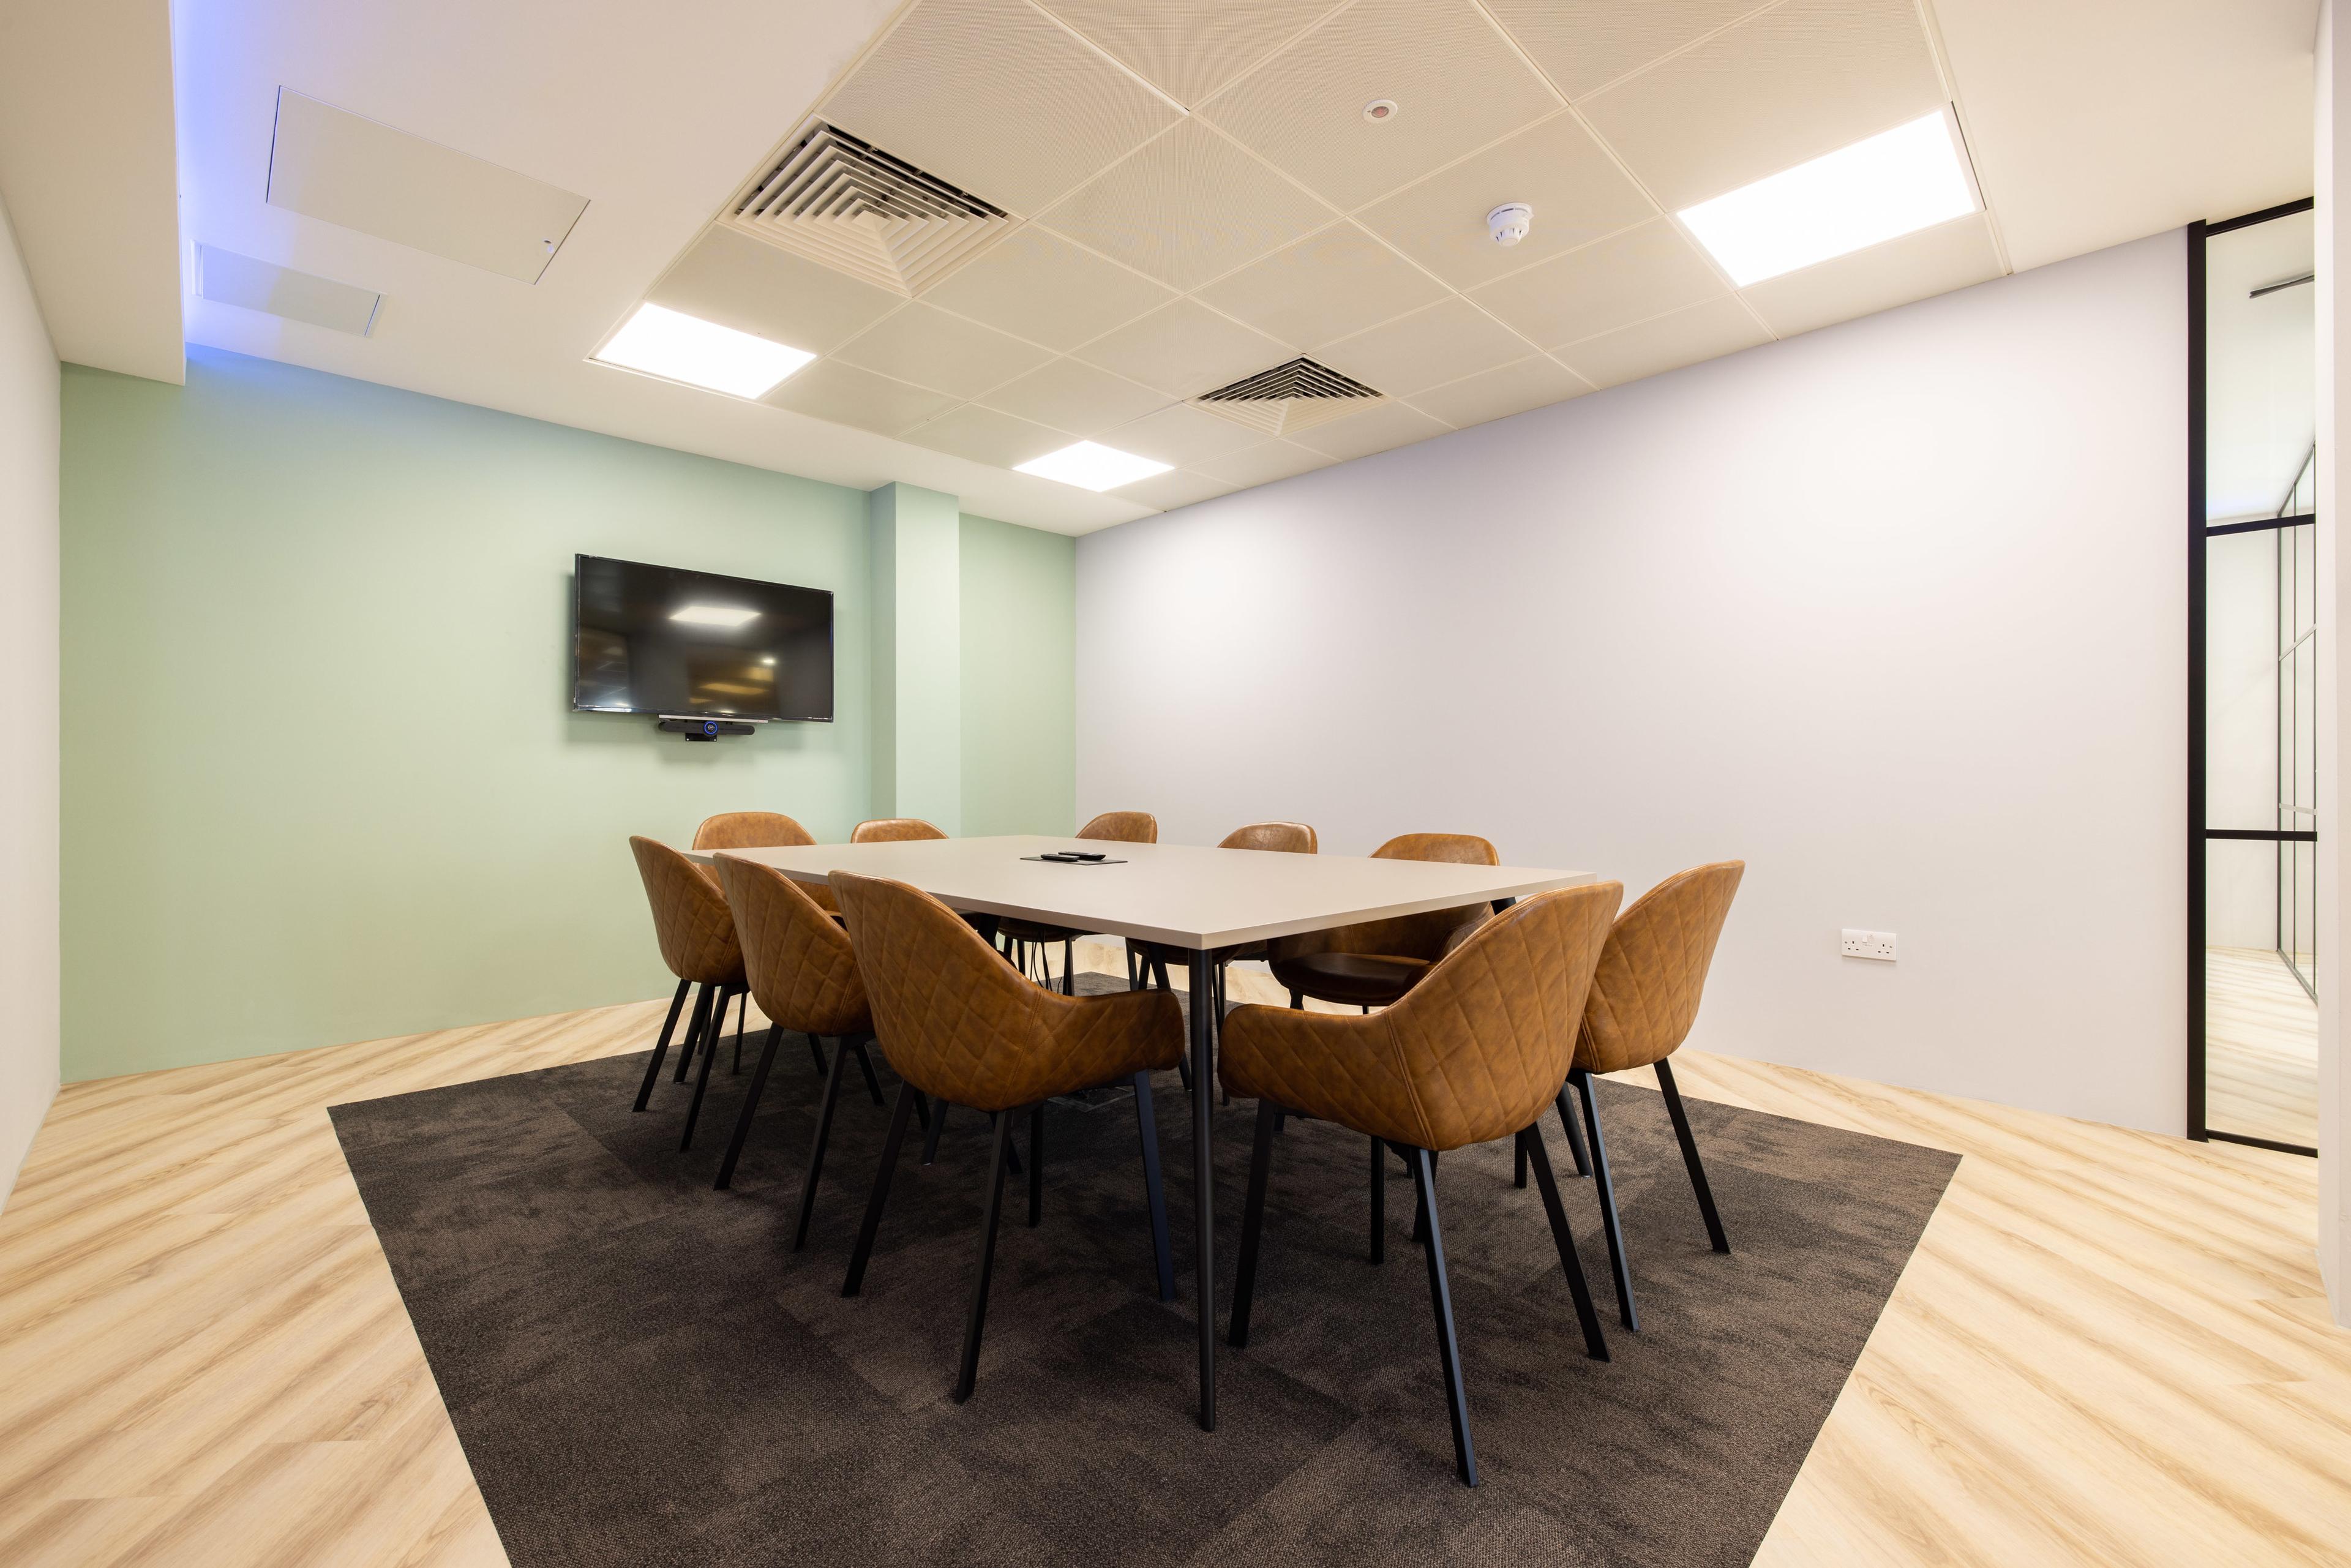 Scope Covent Garden, Floral Street Meeting Room photo #1